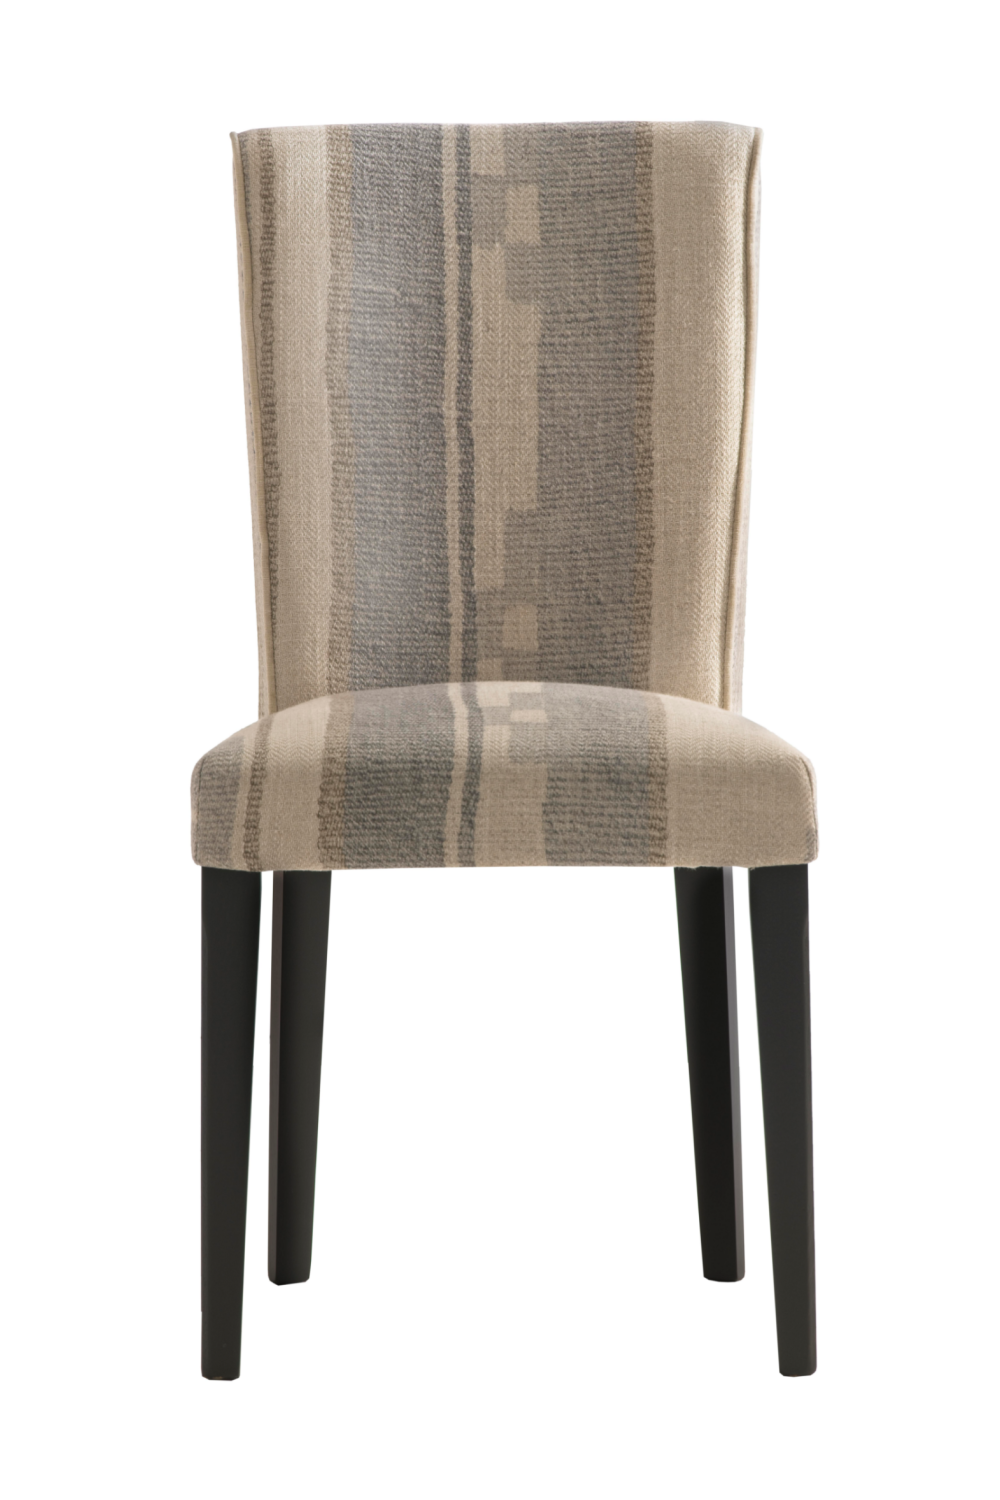 Patterned Fabric Upholstered Dining Chair | Andrew Martin | OROA.com